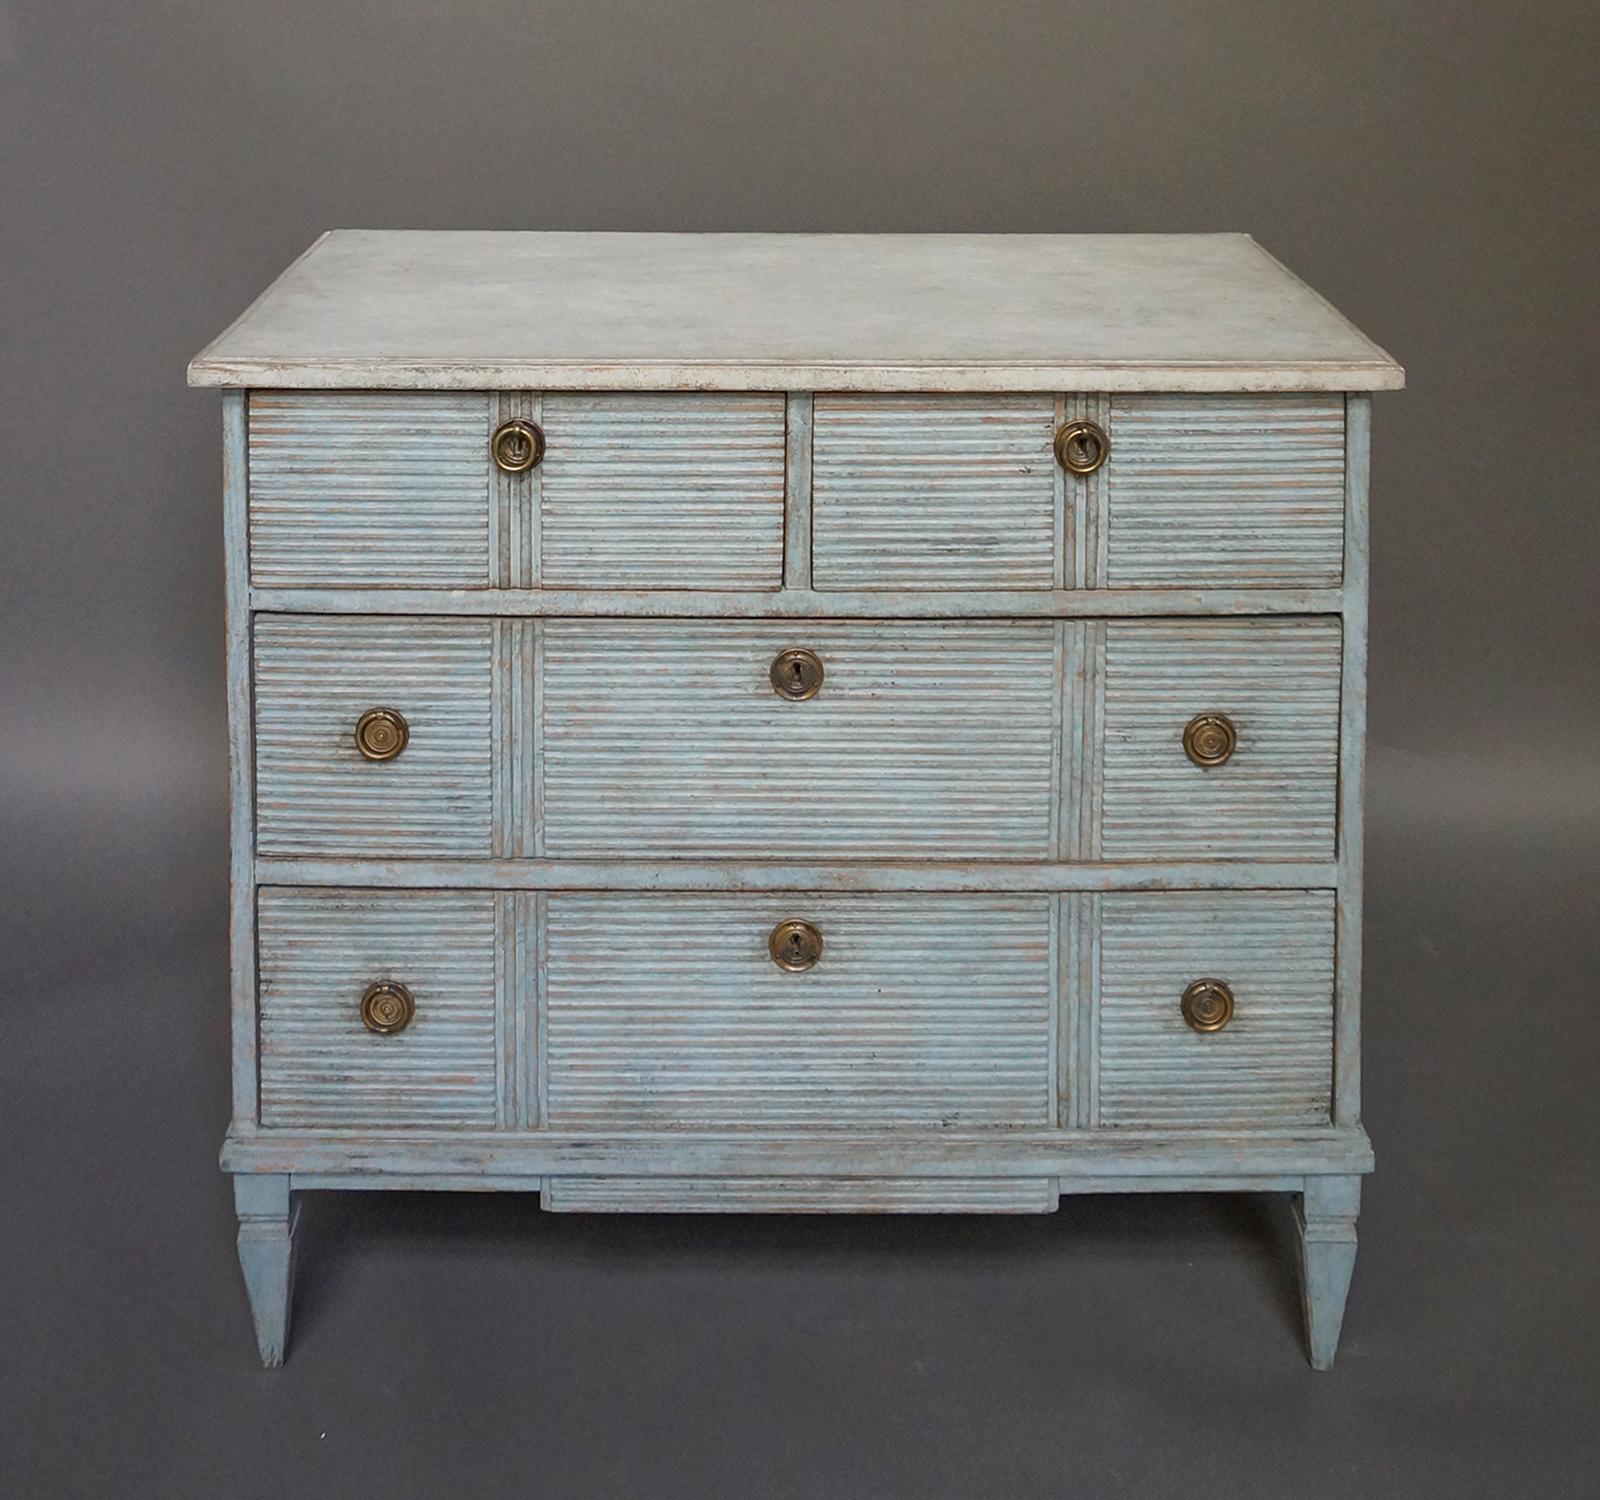 Swedish chest of drawers, circa 1860, with two half-width and two full width drawers over a shaped apron. The horizontal reeding on all drawer fronts is interrupted with bolder vertical lines. Tapering square legs; brass pulls.